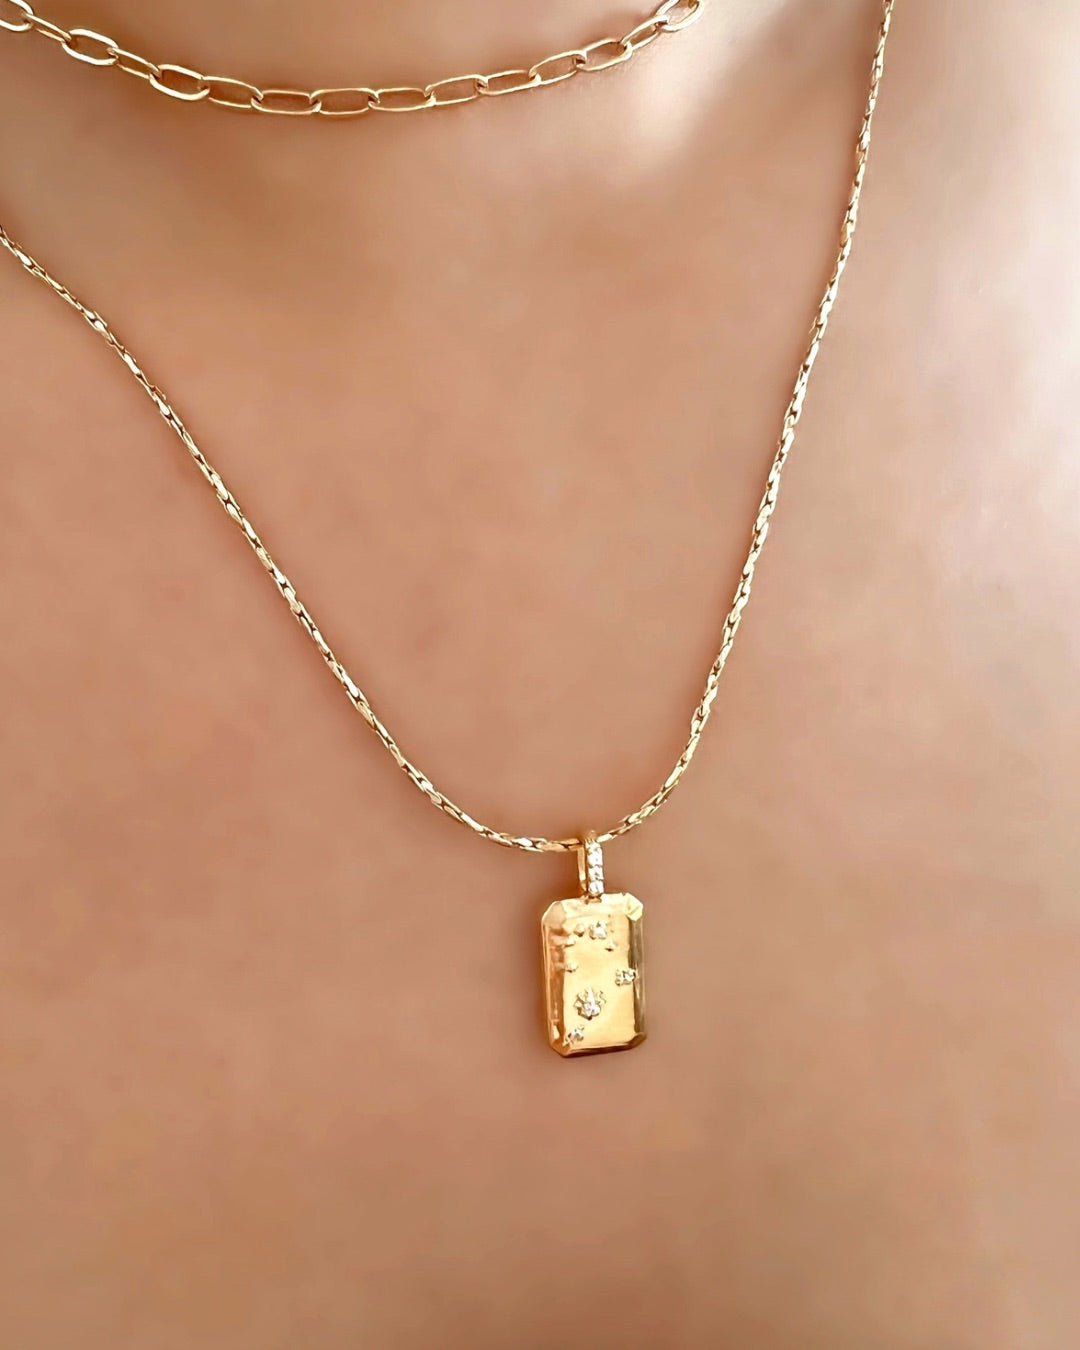 Gold Aquarius Constellation Zodiac Pendant with Gold Necklace Chain on a model